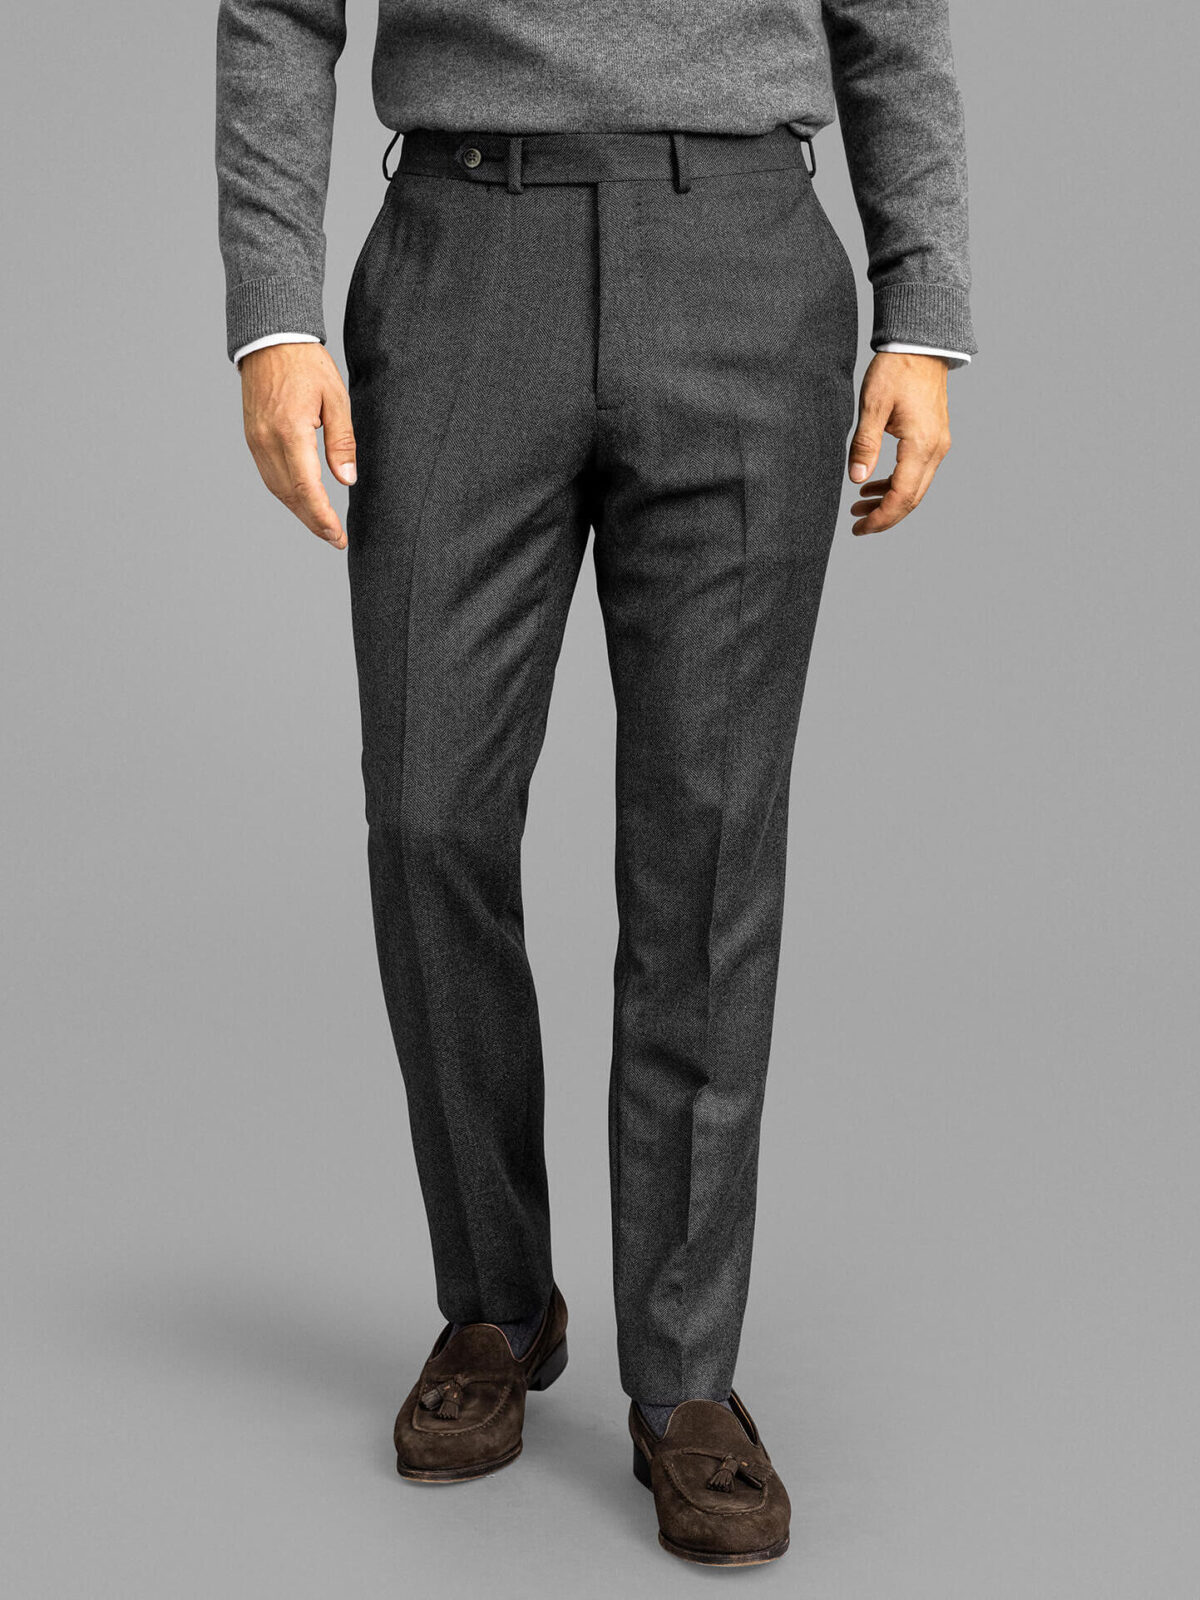 Grey Herringbone Wool Pants Dressy Outfits For Men (6 ideas & outfits)